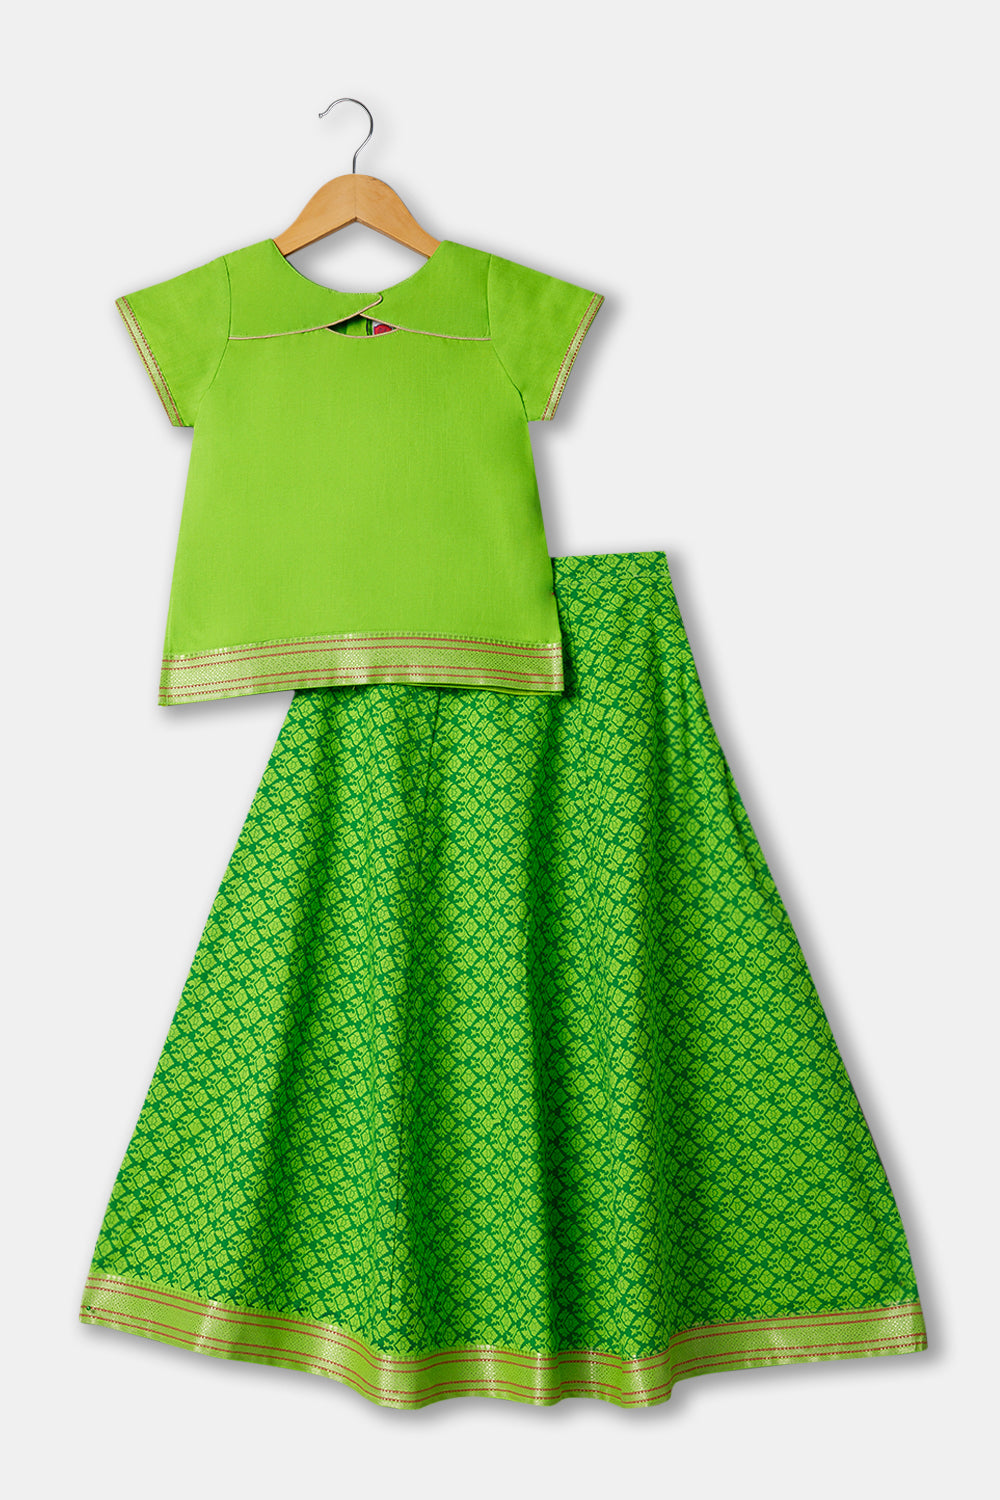 Chittythalli Girls Ethnic wear Cotton printed fabric  Pavadai Set with Stylized Neck Half Sleeve - Green - PS65